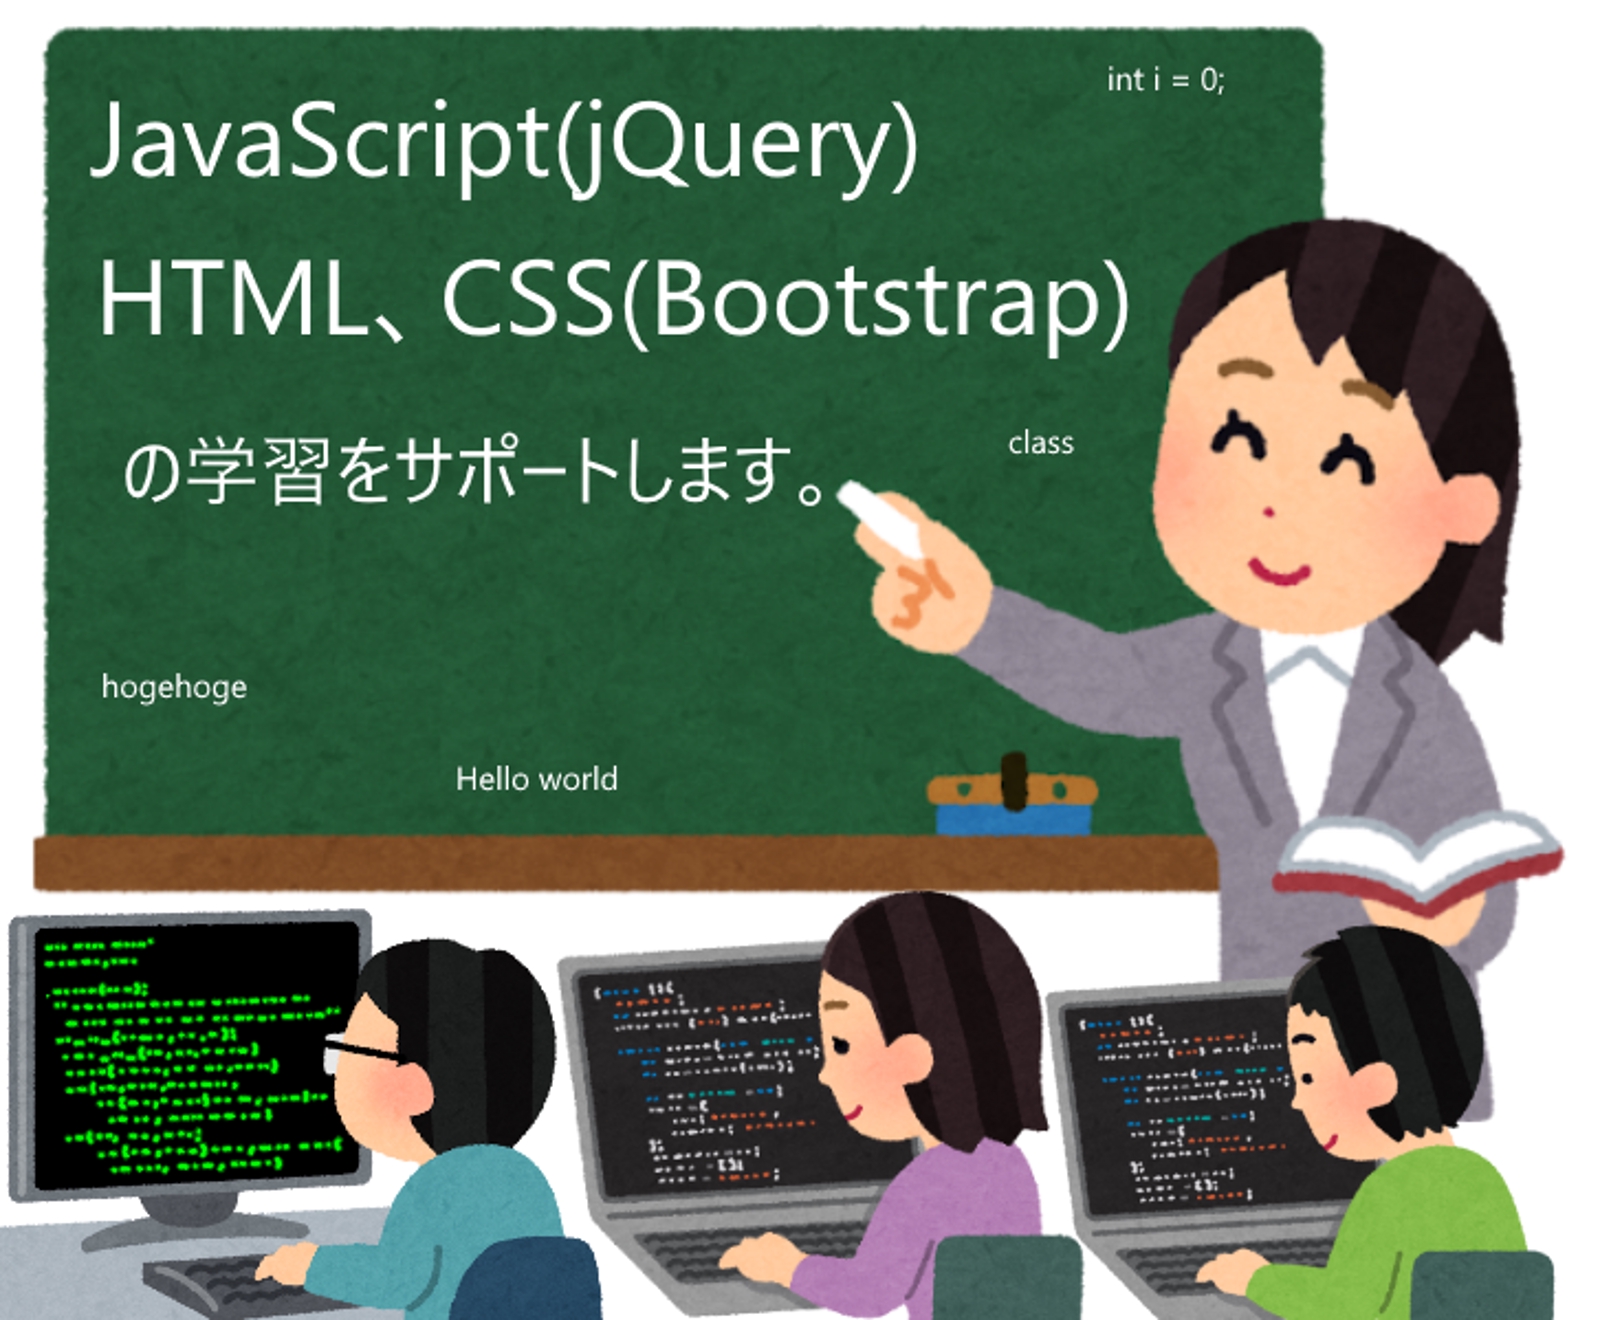 JavaScript(jQuery)、HTML、CSS(Bootstrap)の学習サポートします。-image1